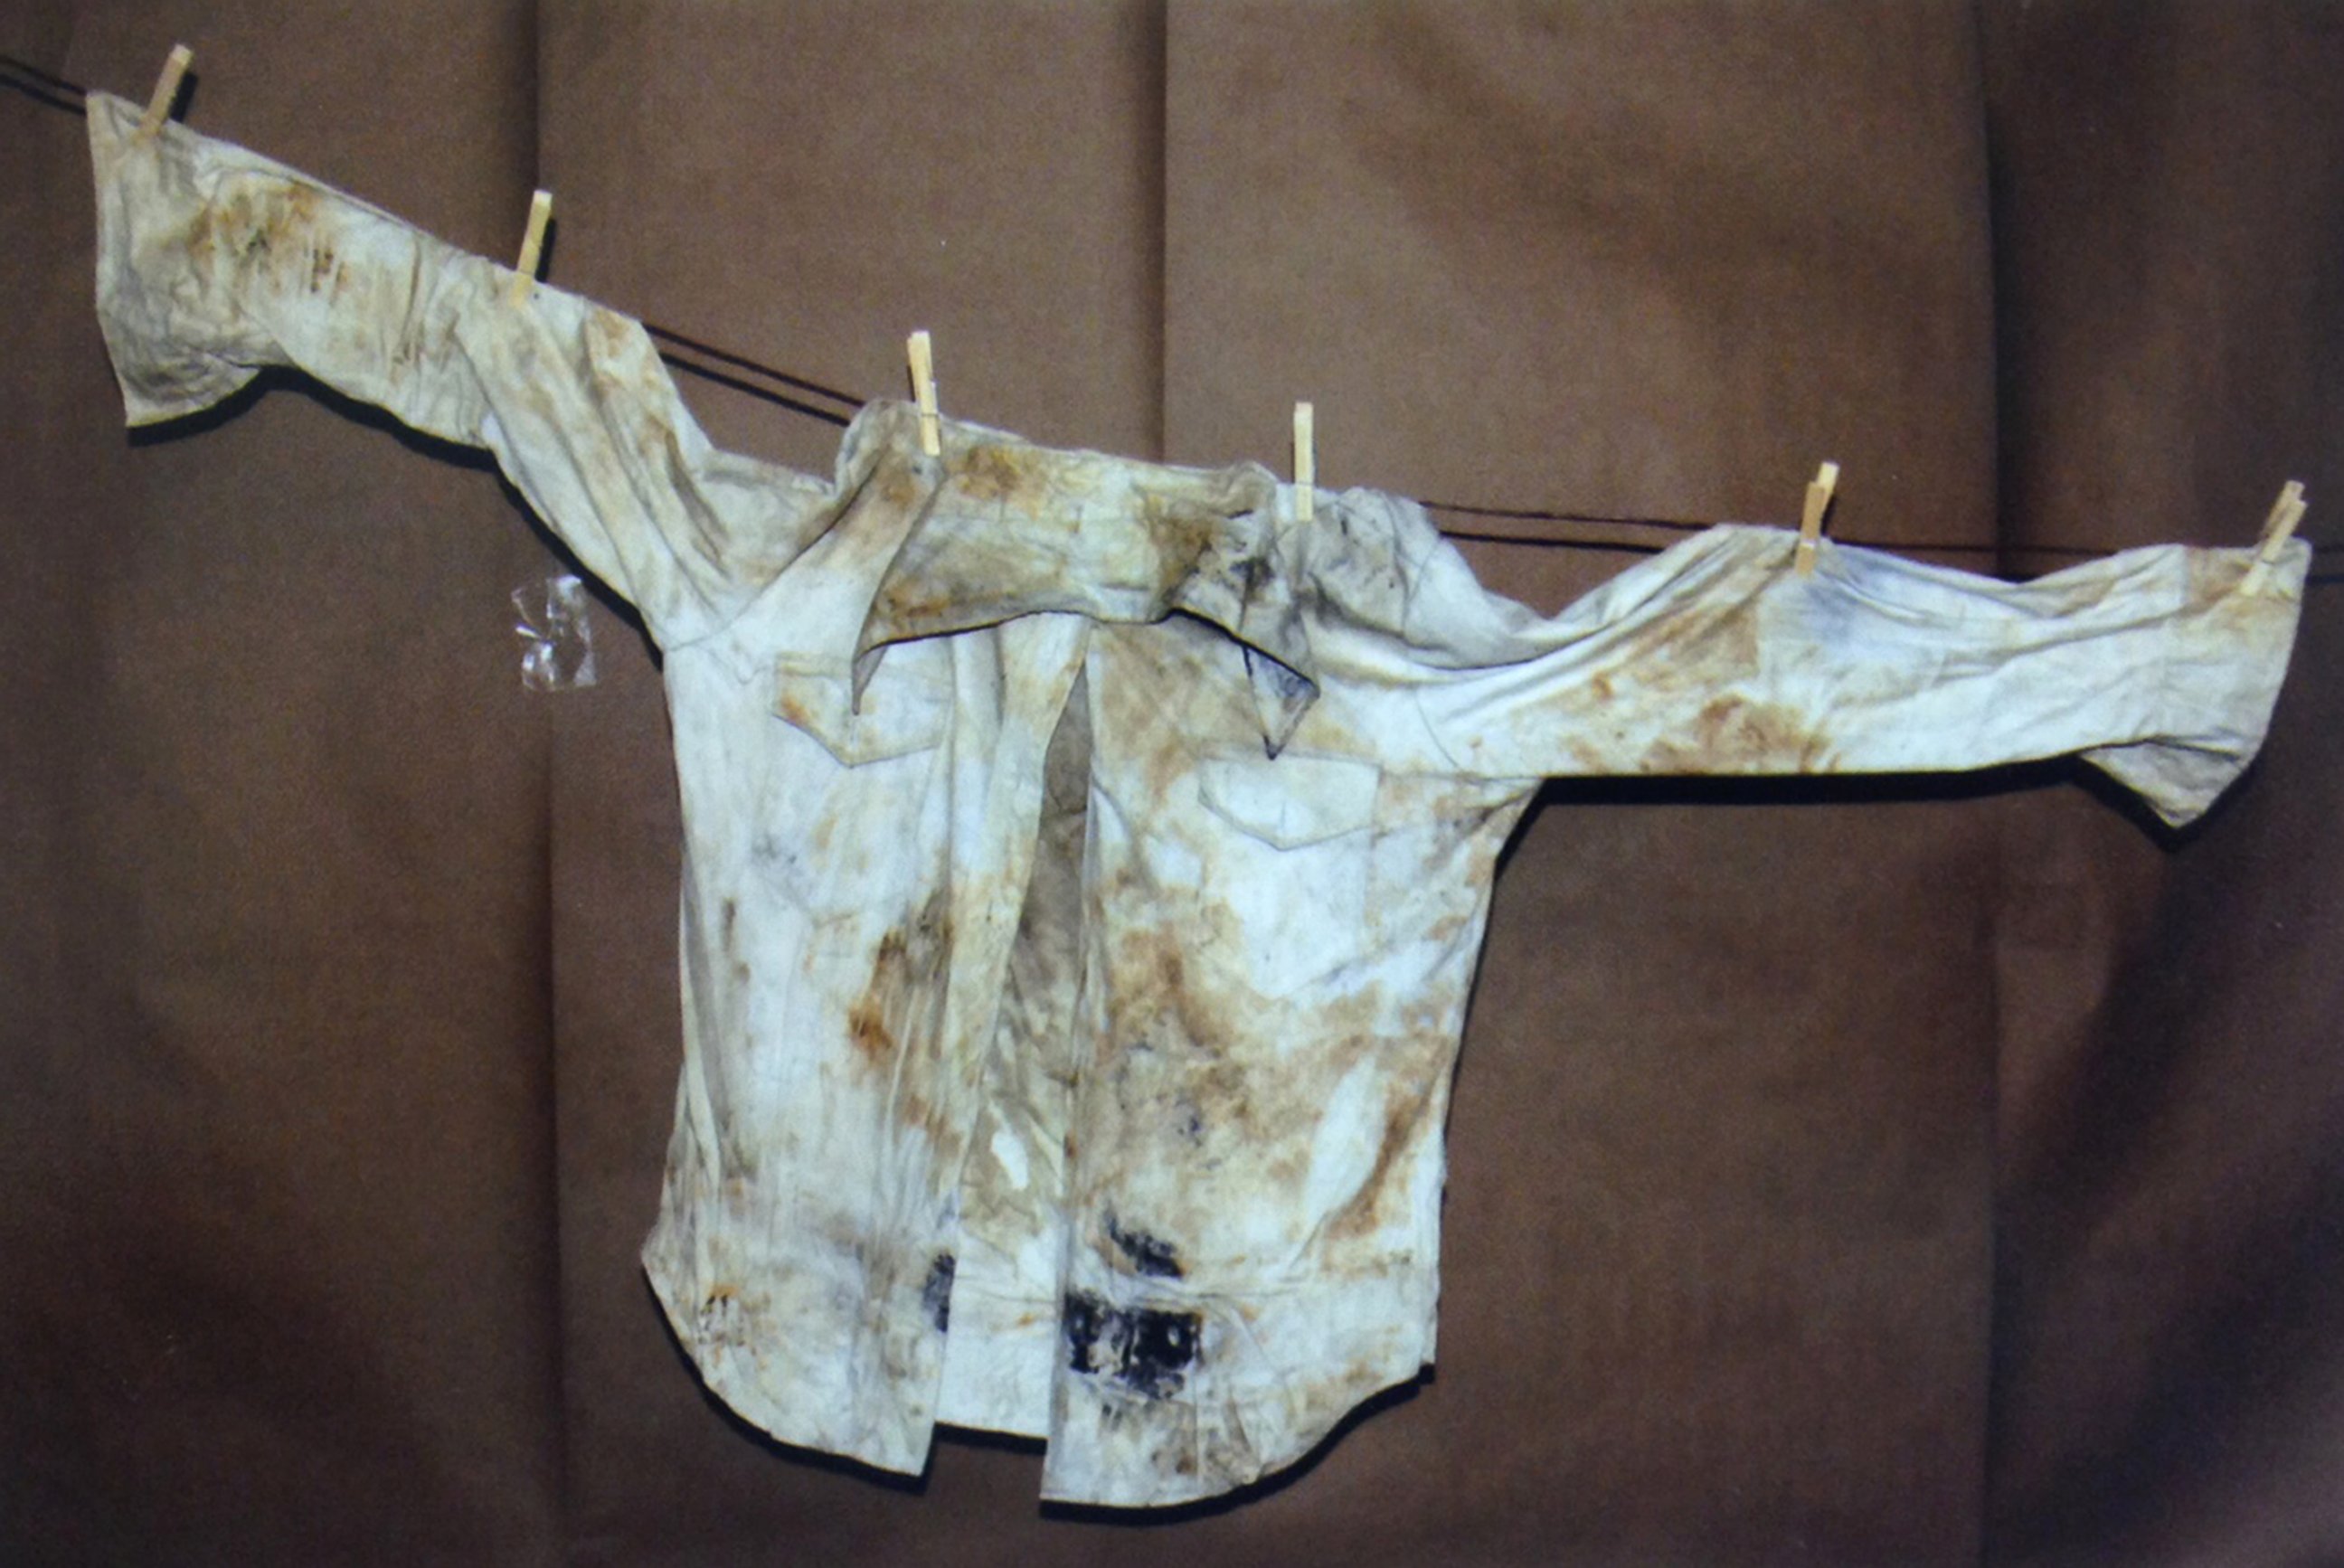 PHOTO: In this undated photo provided by the South Dakota Attorney Generals Office, clothing found from the 1960 Studebaker unearthed in September 2013 is seen. 